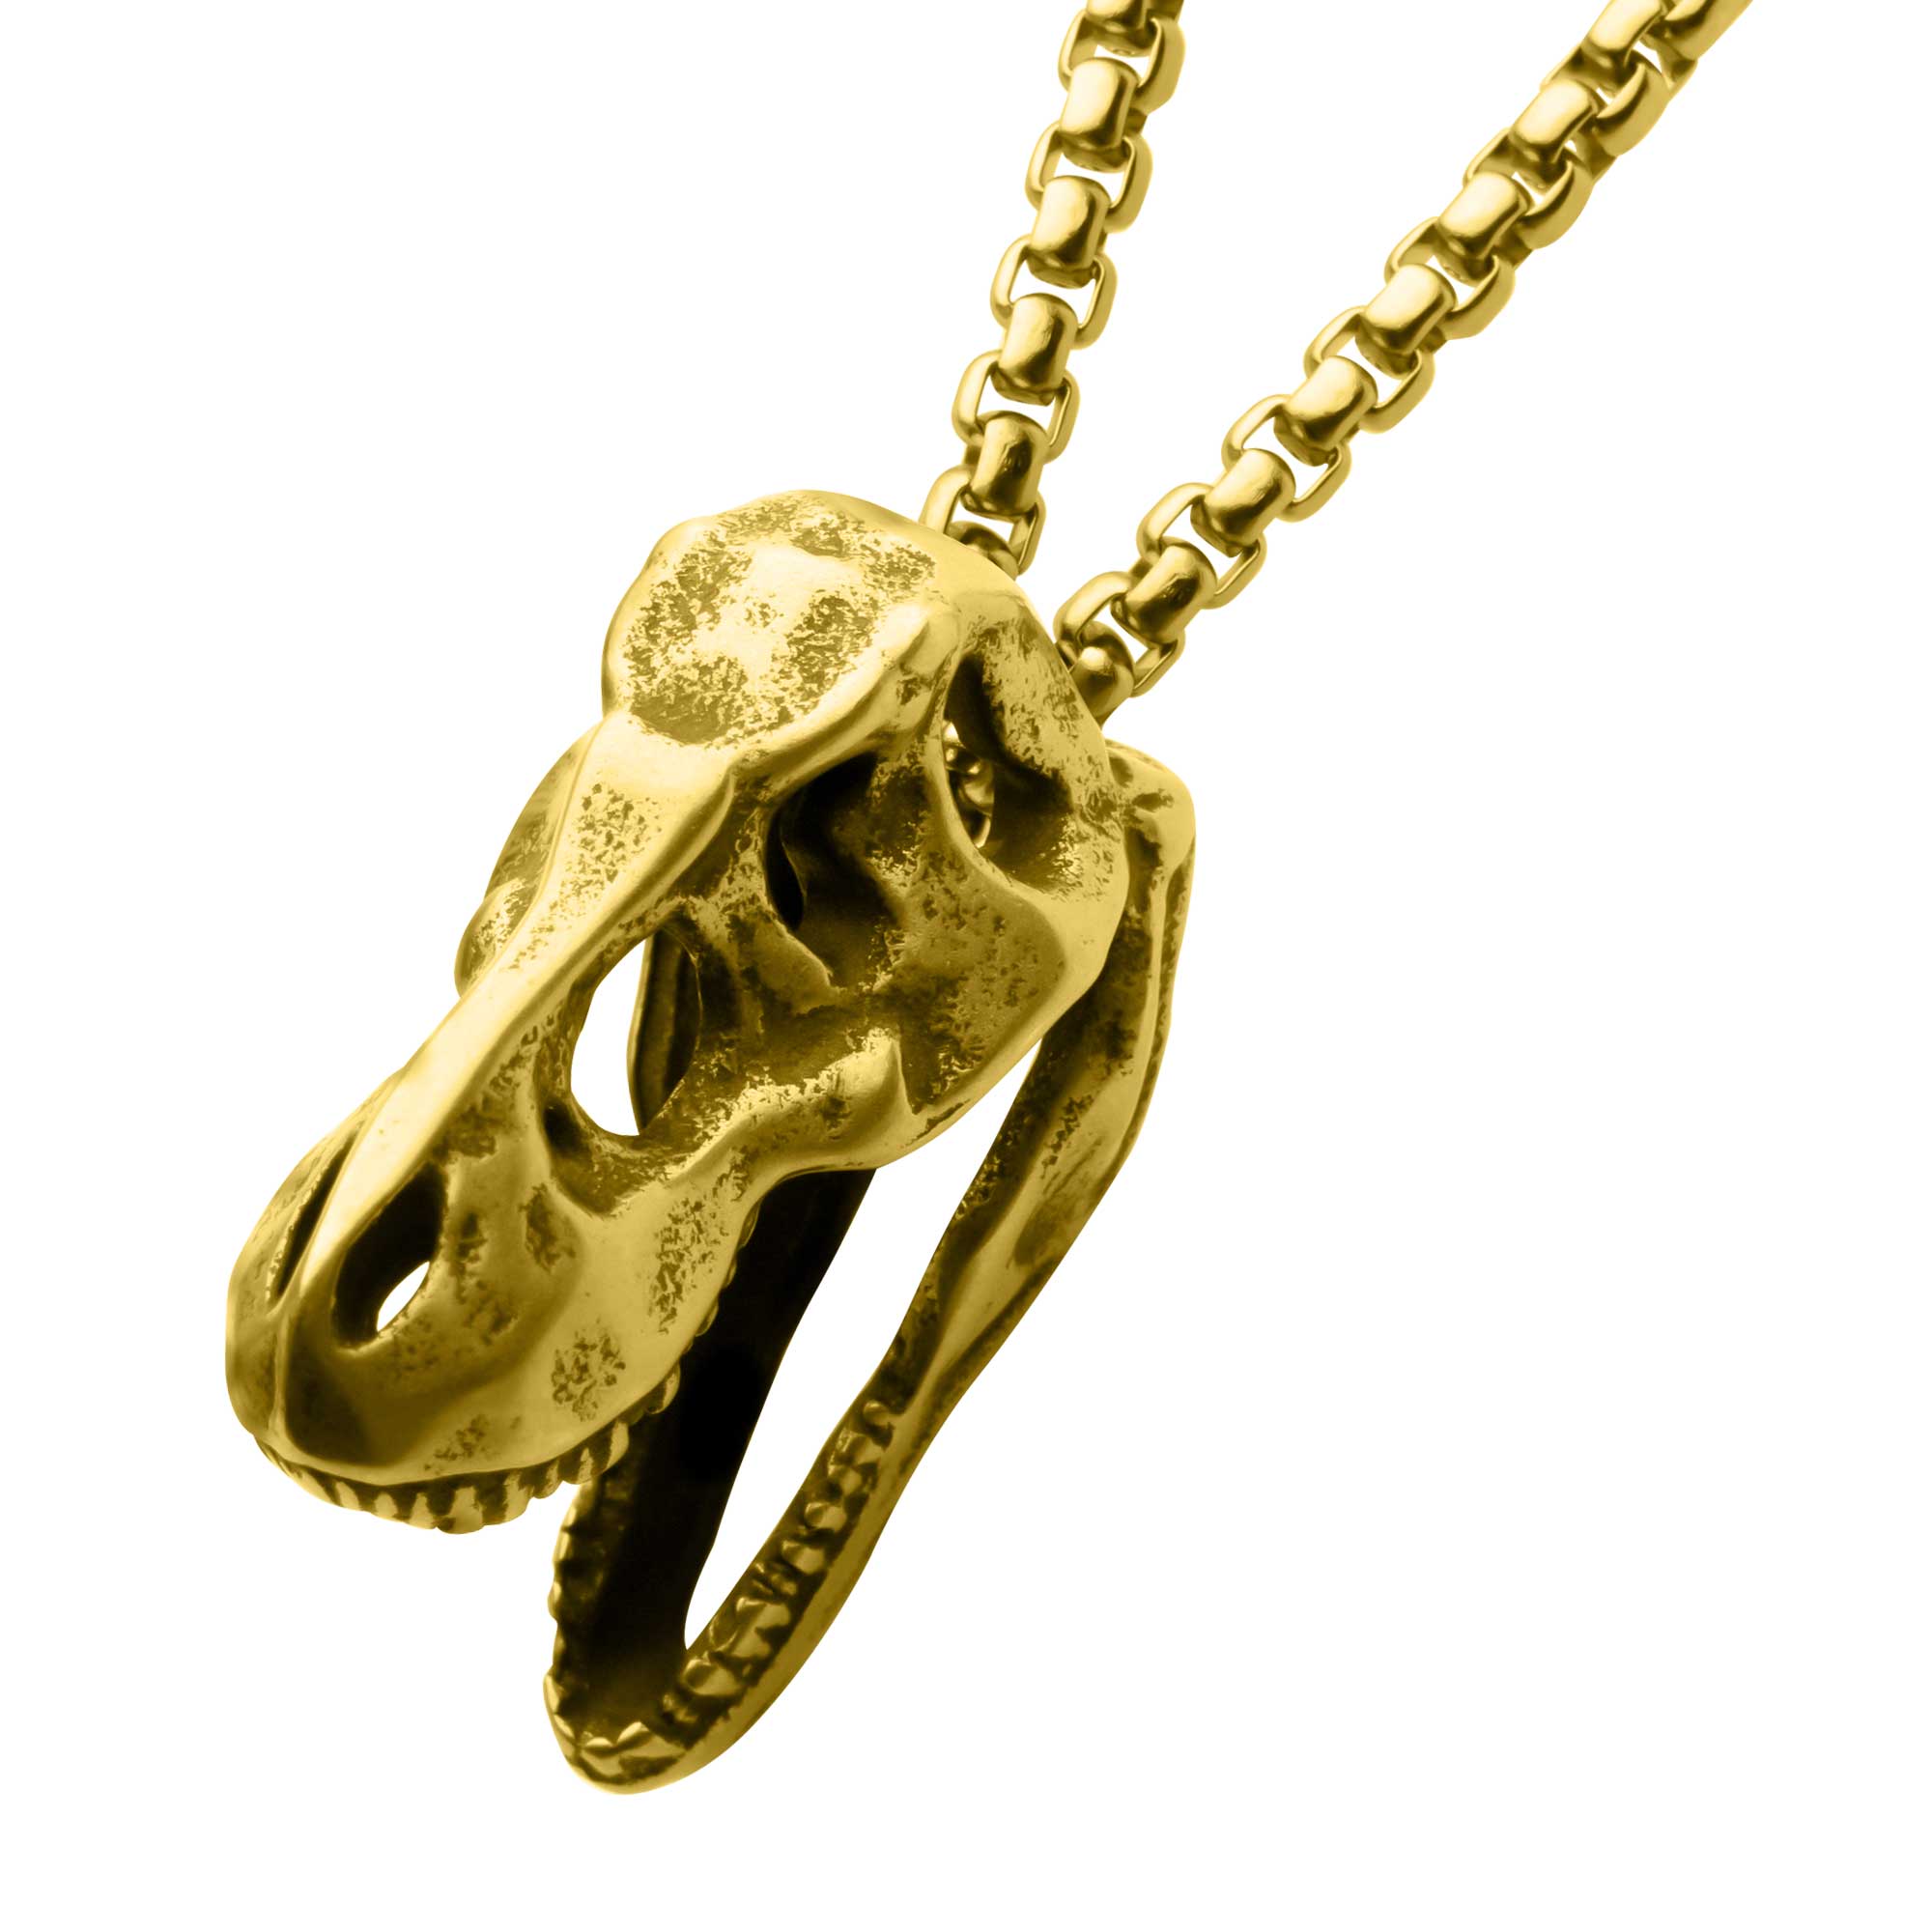 Distressed Matte 18Kt Gold IP T-Rex Skull Pendant with Chain Lewis Jewelers, Inc. Ansonia, CT